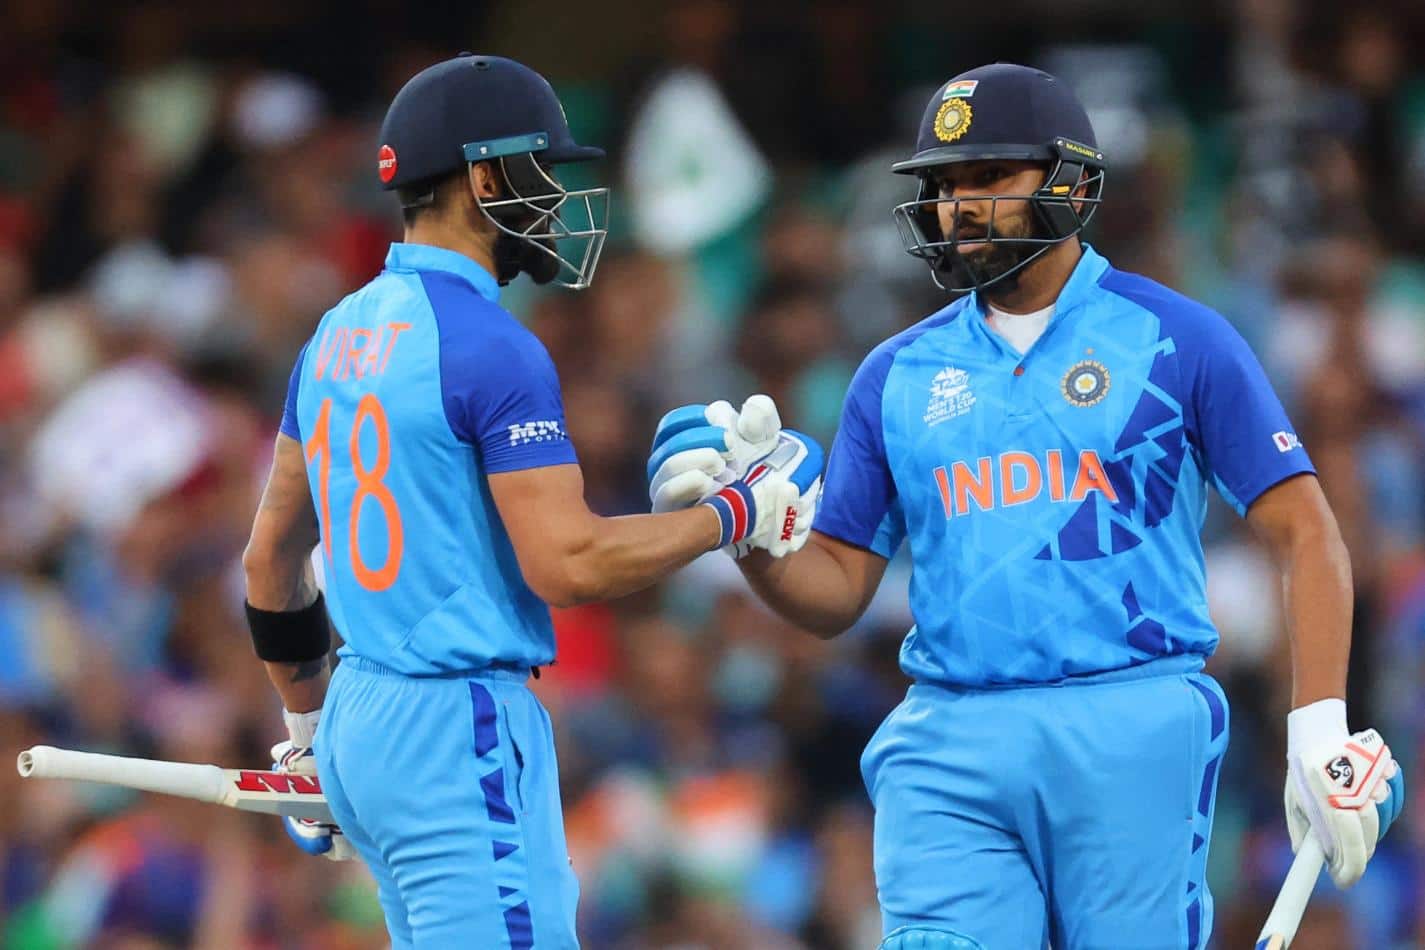 'Keep Quiet For A While' - When Rohit Sharma Was Asked About Virat Kohli's Form